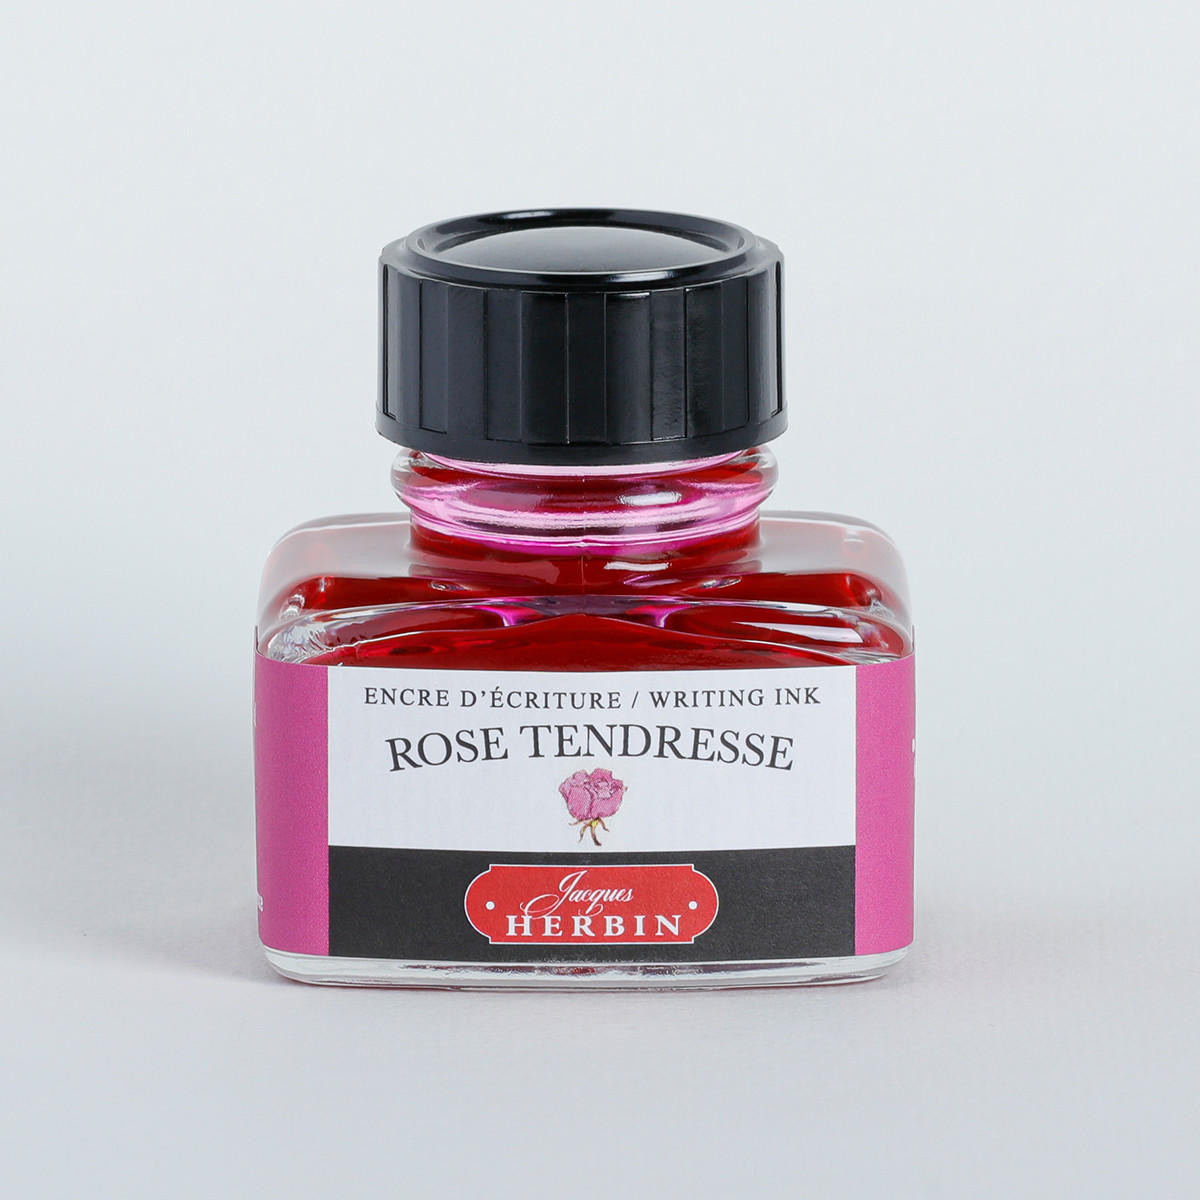 Herbin ’D’ Writing and Drawing Ink 30ml Rose tendresse